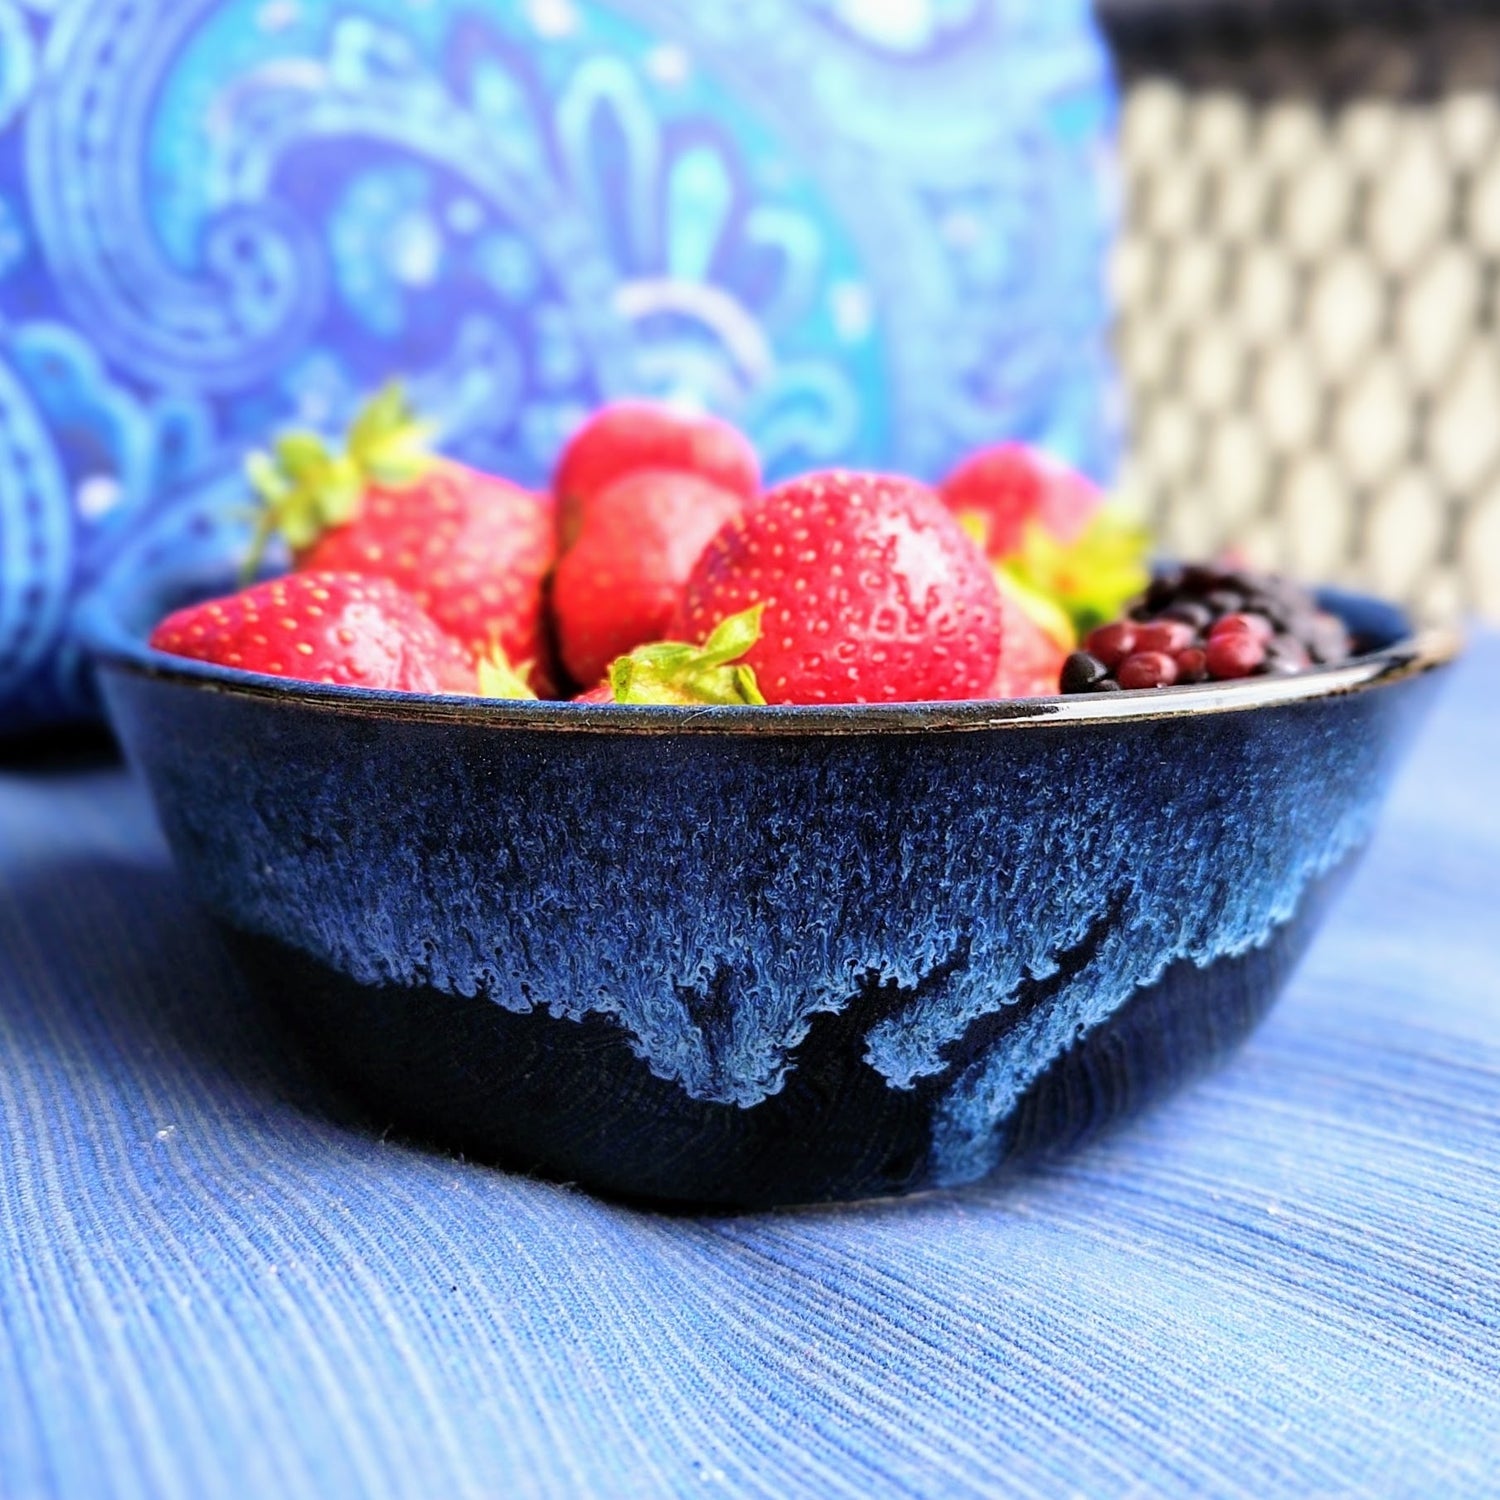 Lucious strawberries and blueberries in a handmade blue and black bowl sitting on a blue cushion